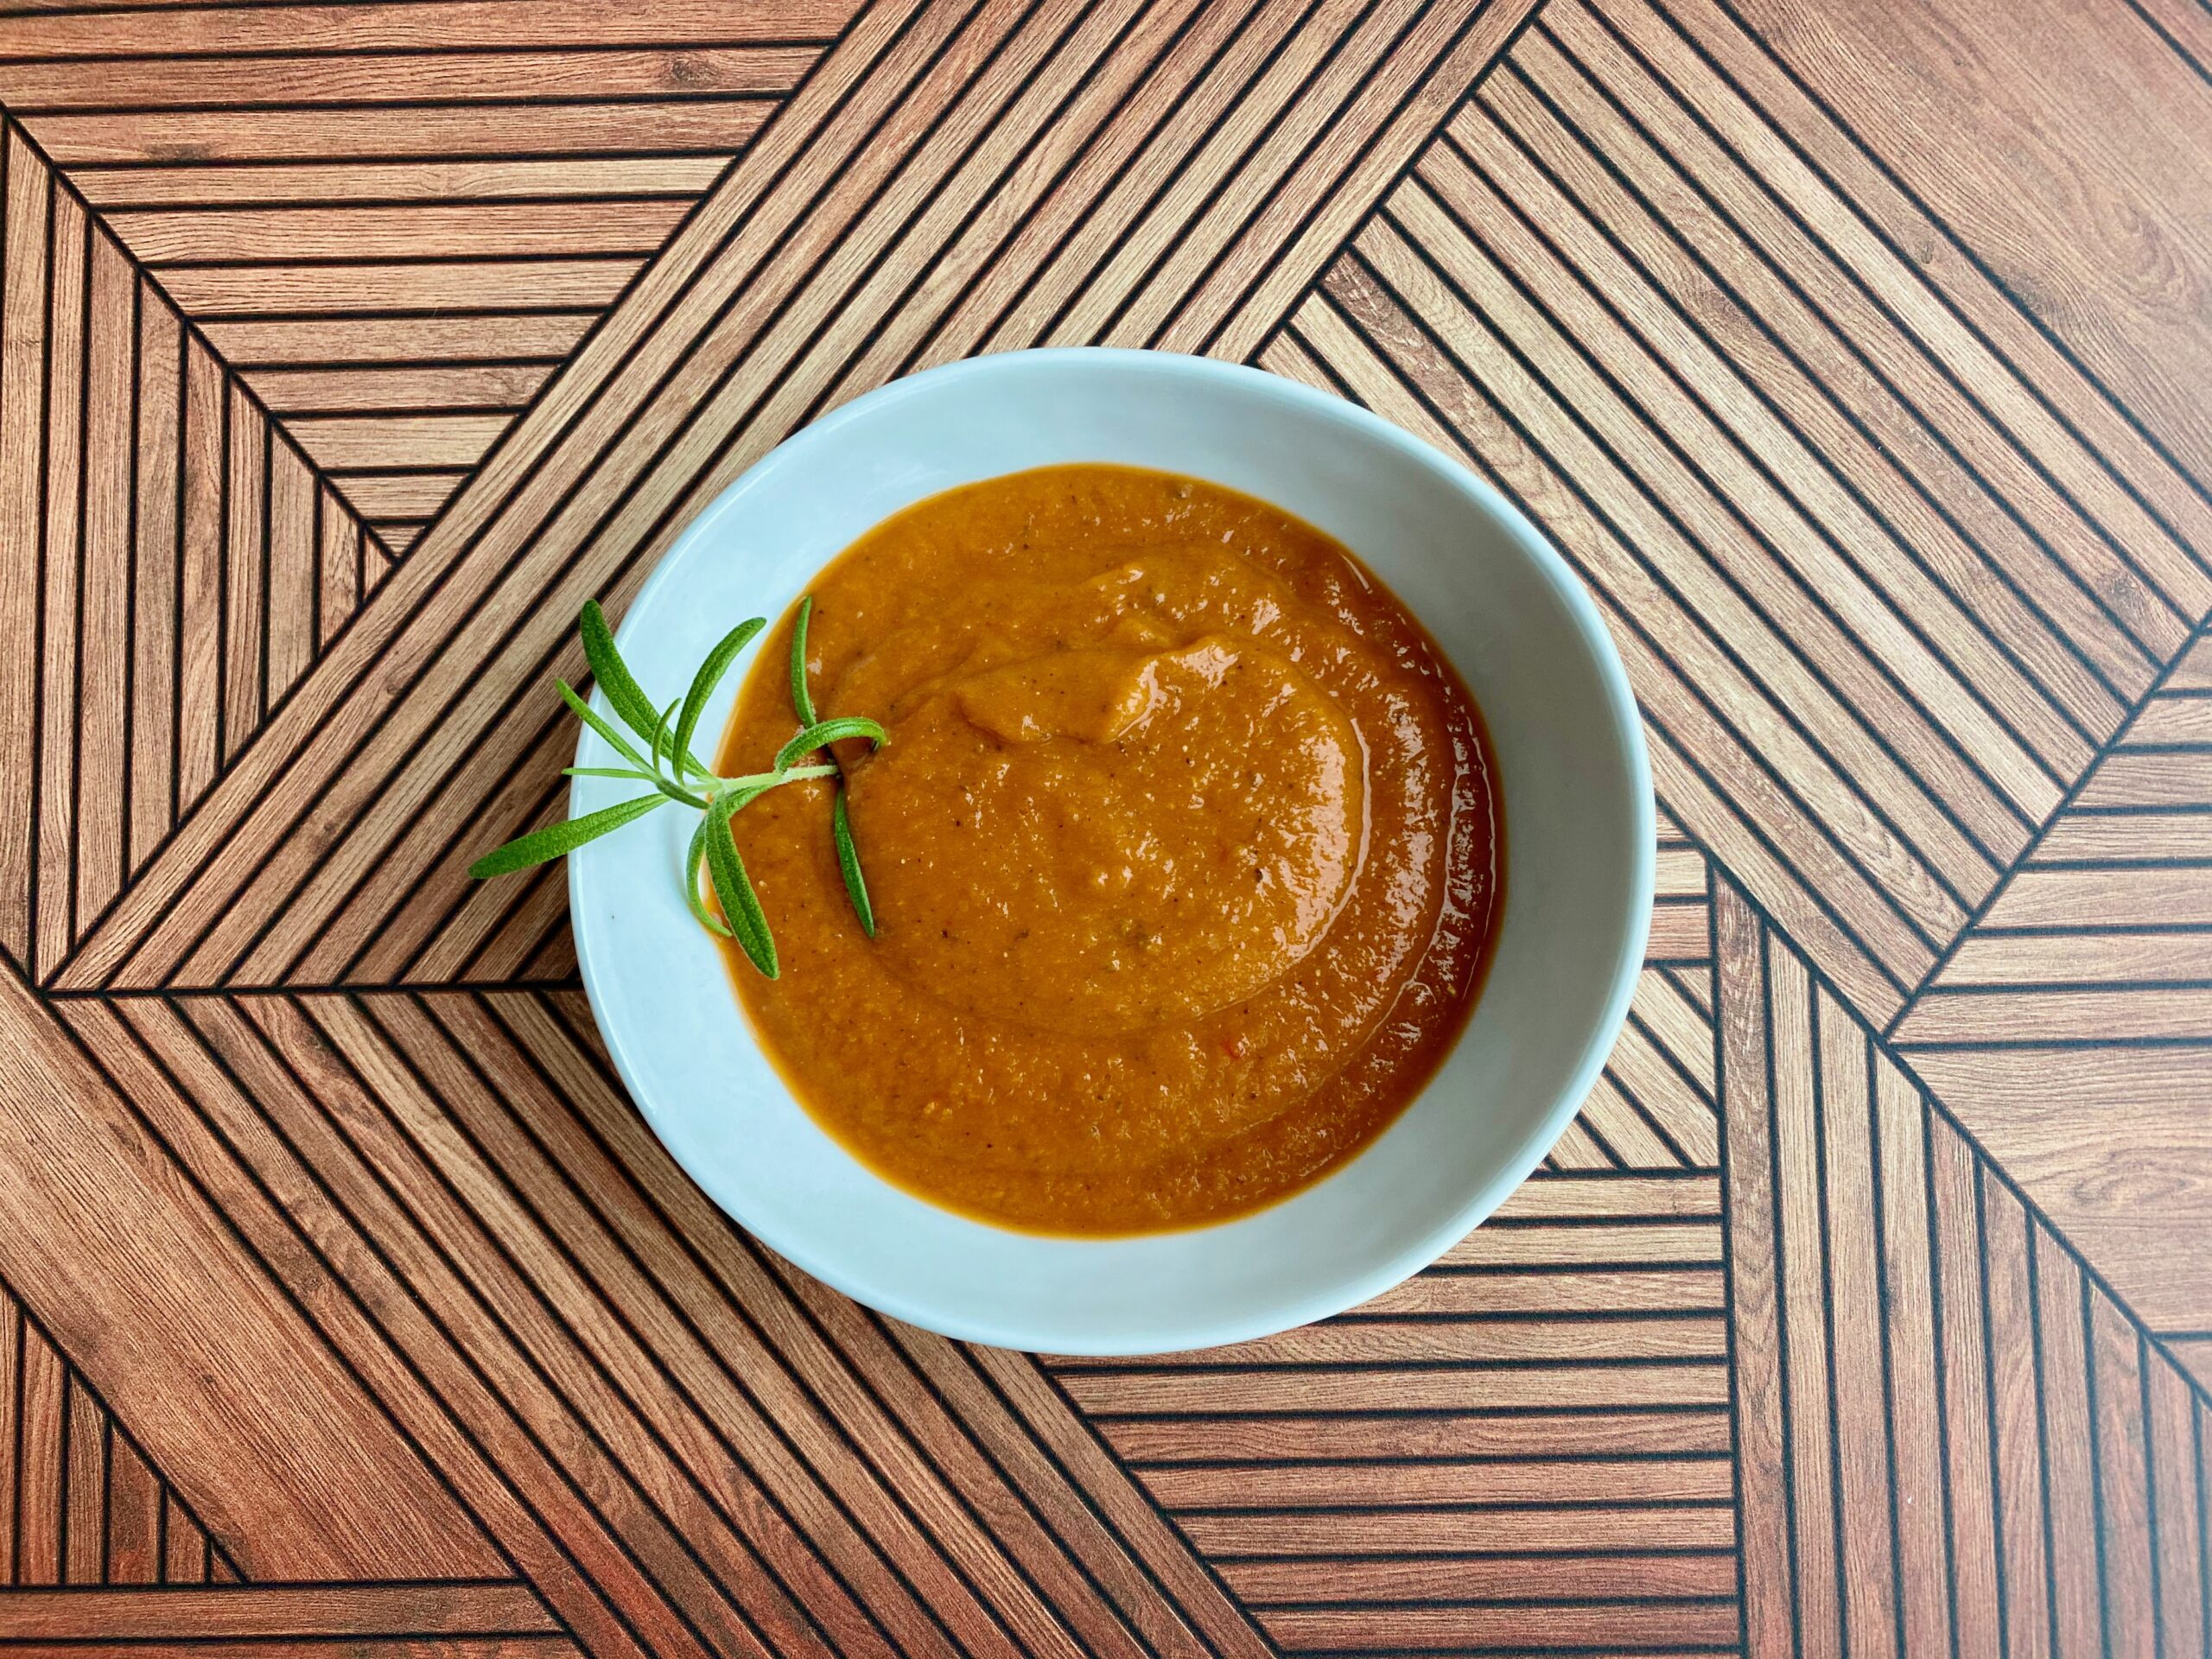 An image of a bowl full of tomato soup